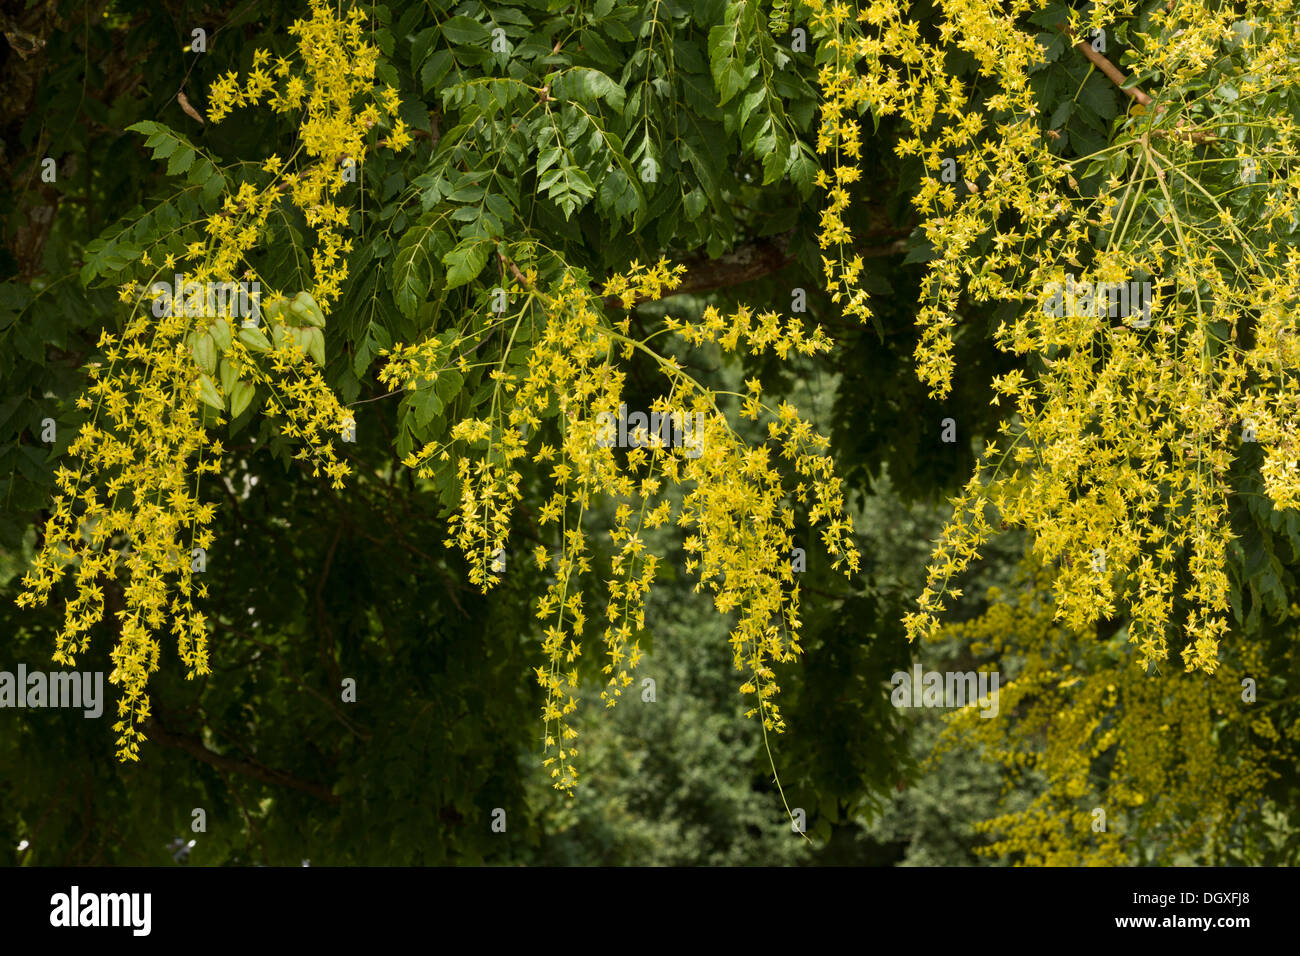 Golden rain tree or Pride of India, Koelreuteria paniculata in flower and fruit. From Asia, widely planted in Europe. Stock Photo